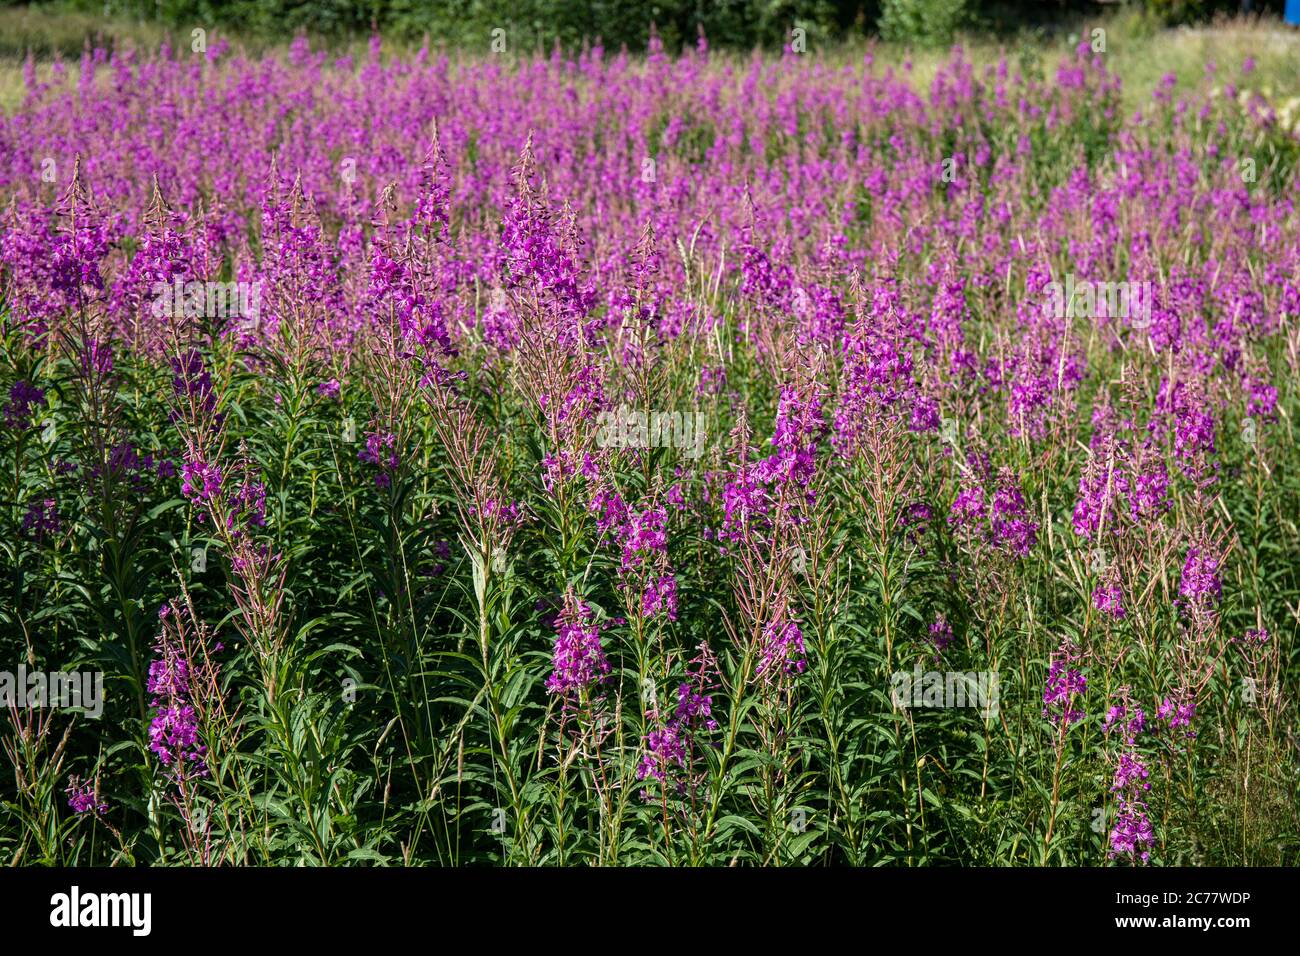 Field full of Chamaenerion angustifolium, also known as fireweed or rosebay willowherb Stock Photo